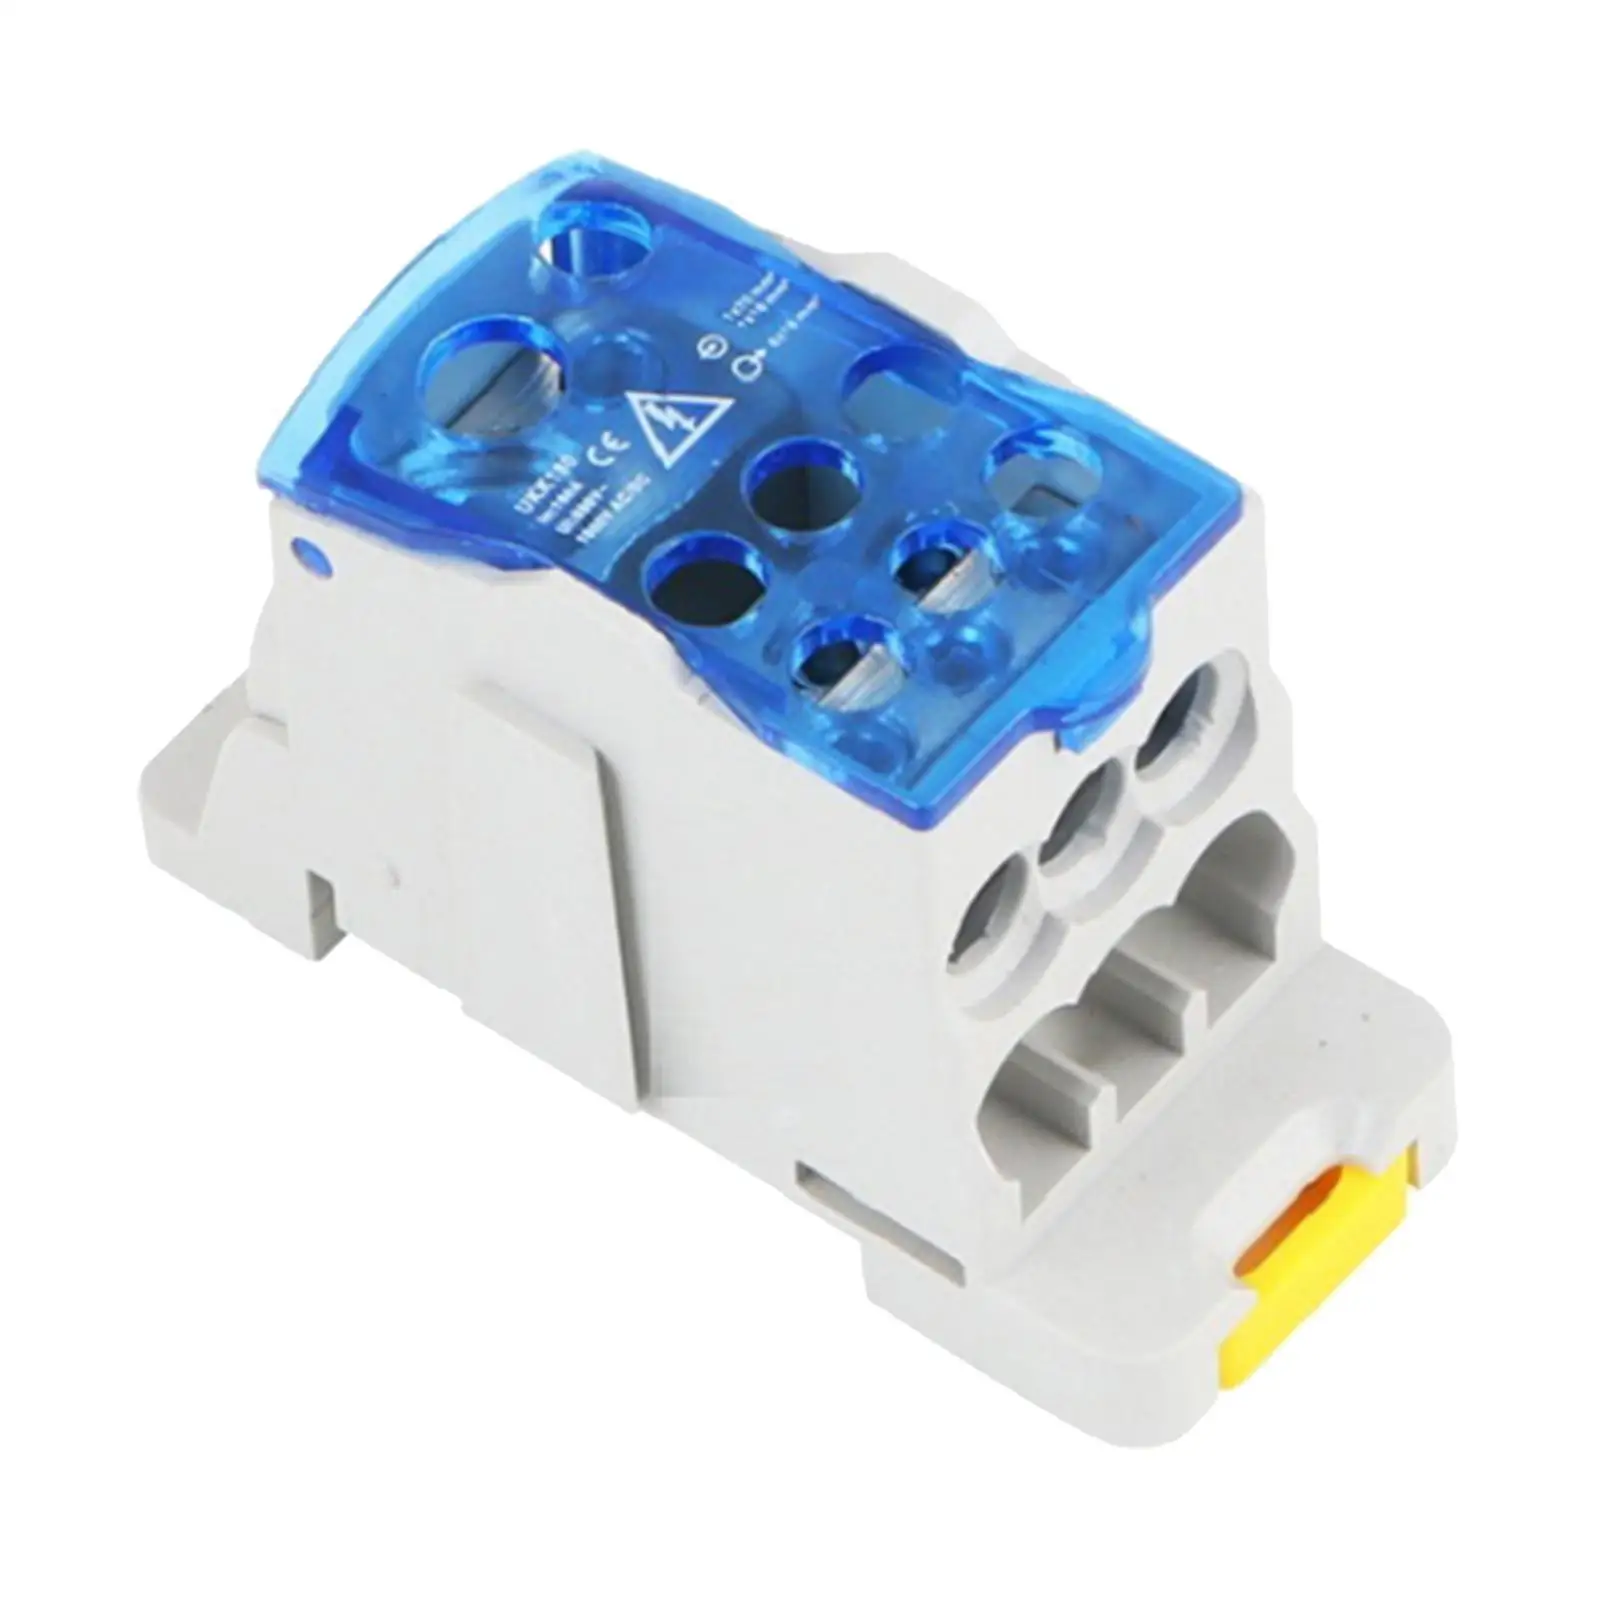 Terminal Case Block Distribution Box Electric Wire Connector Power Junction Box for Power Distribution Cabinets with Cover